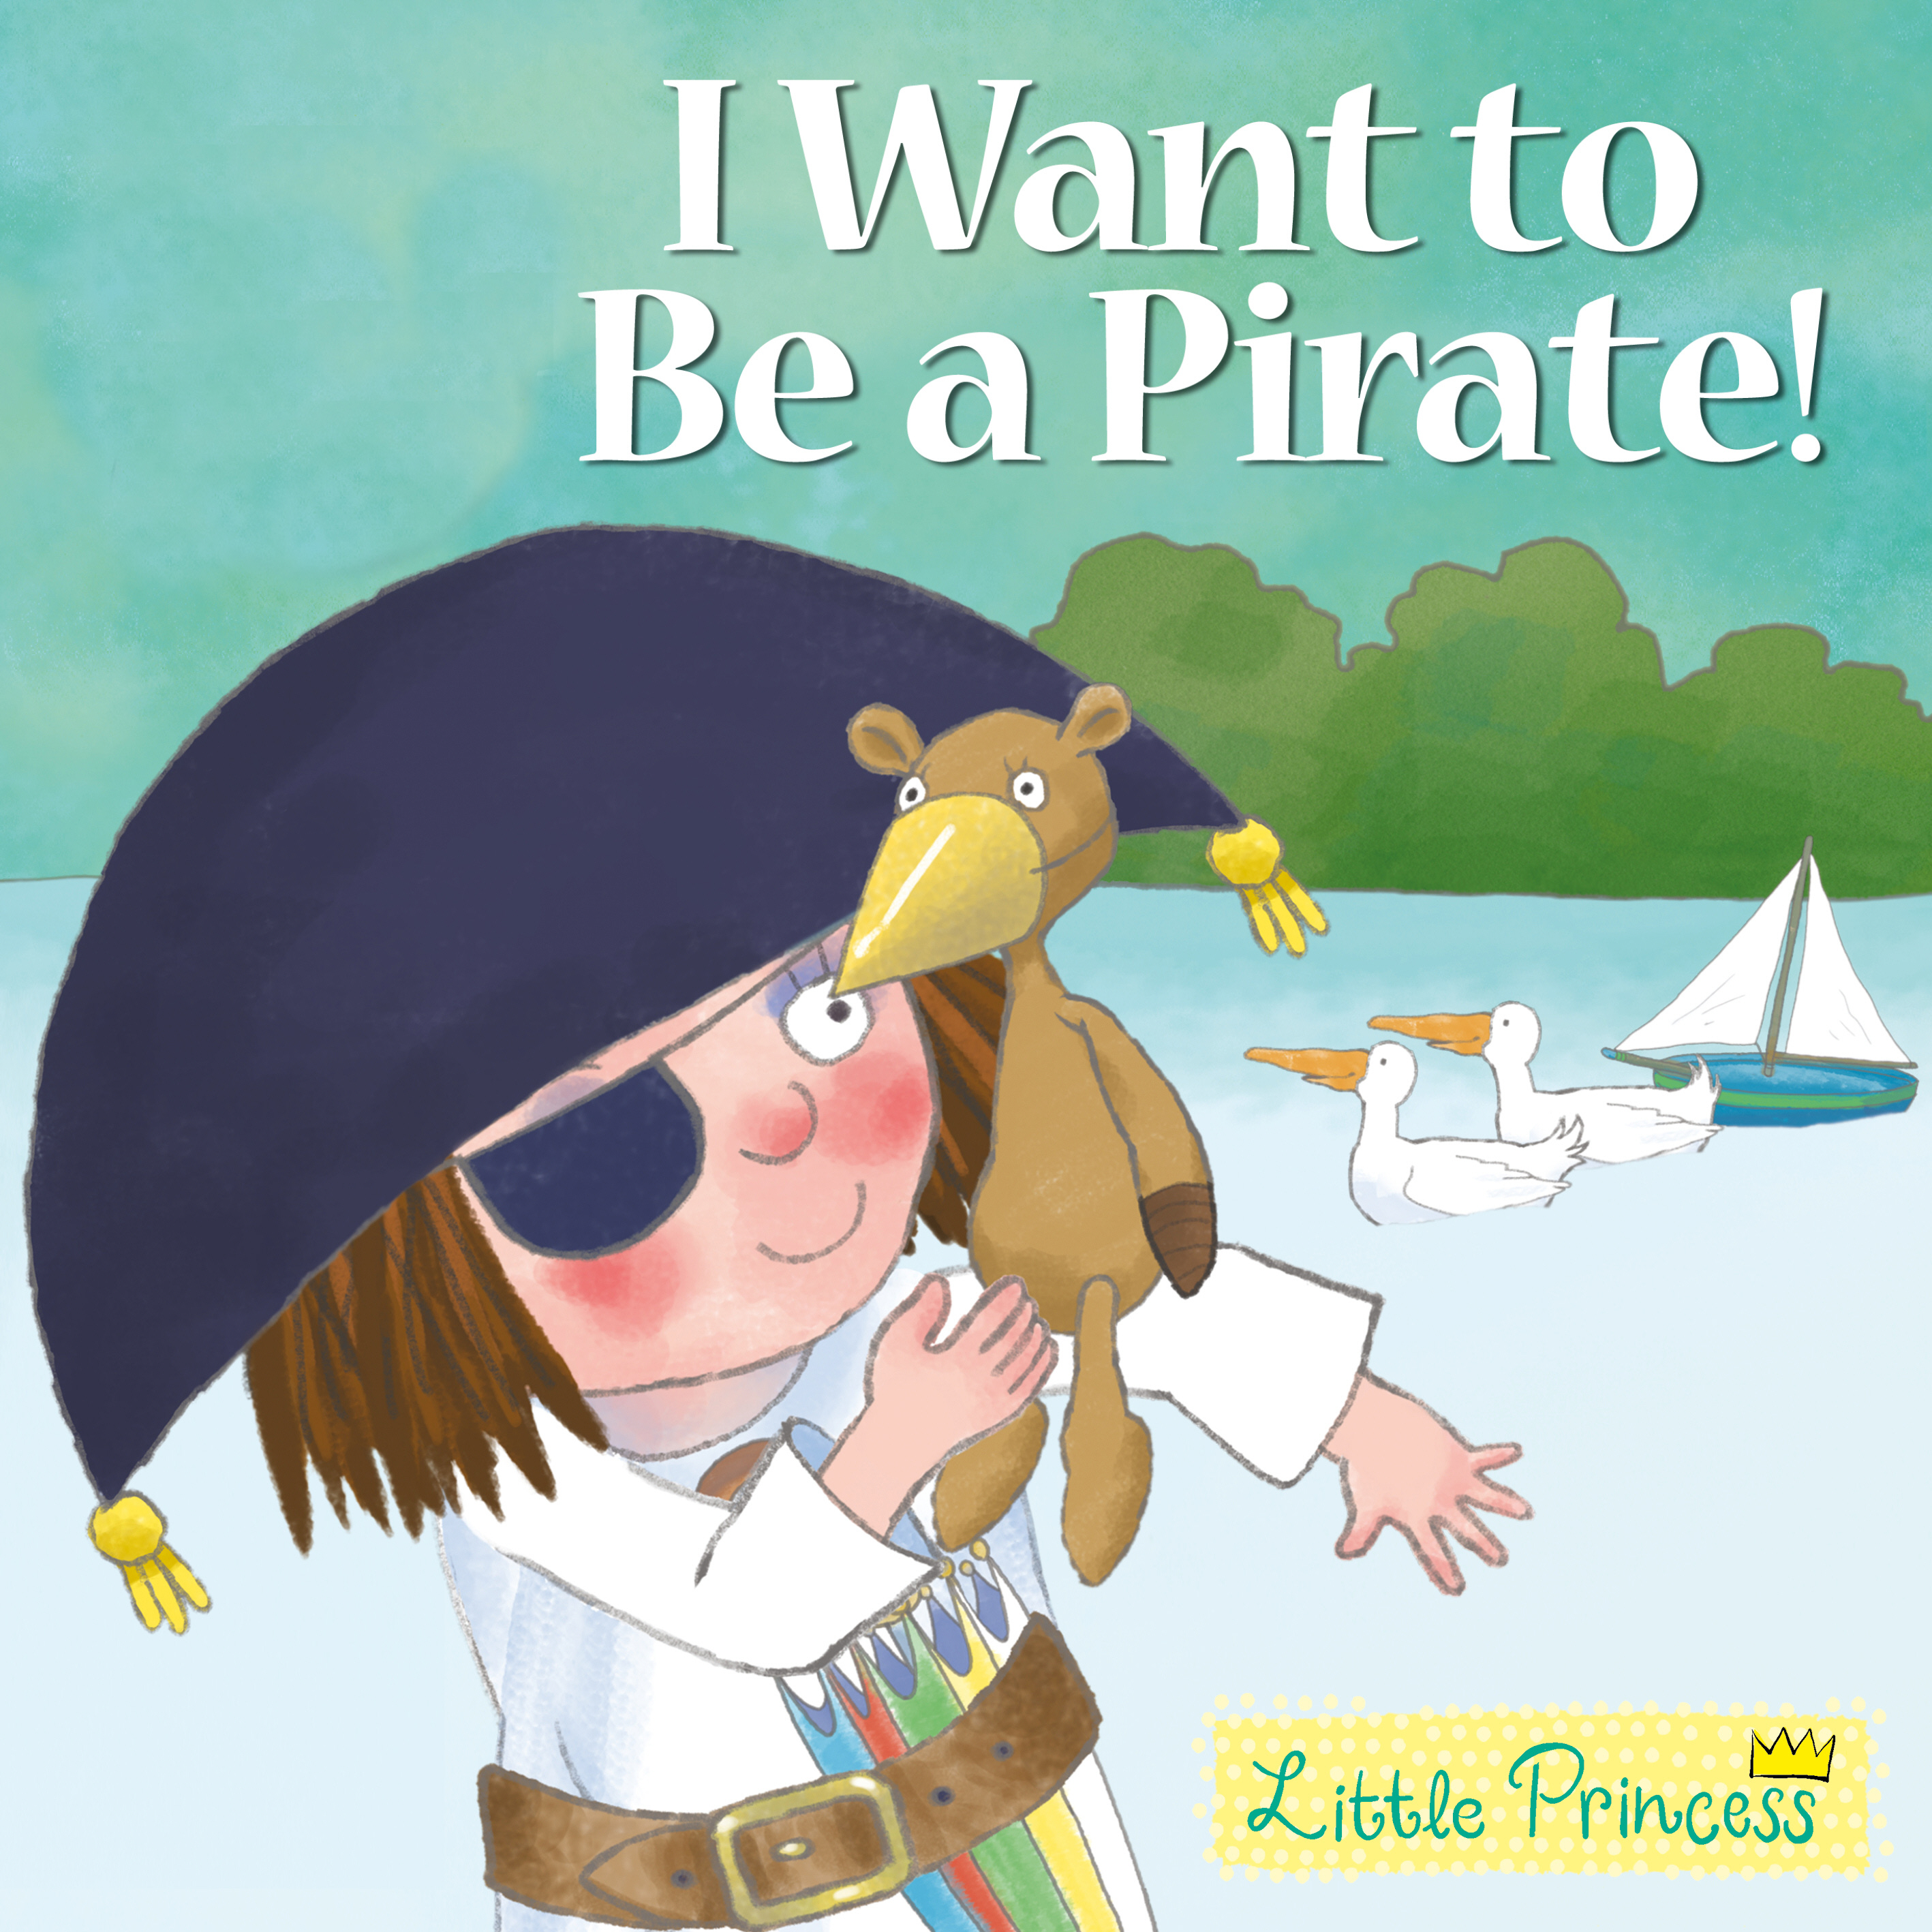 I Want to Be a Pirate!